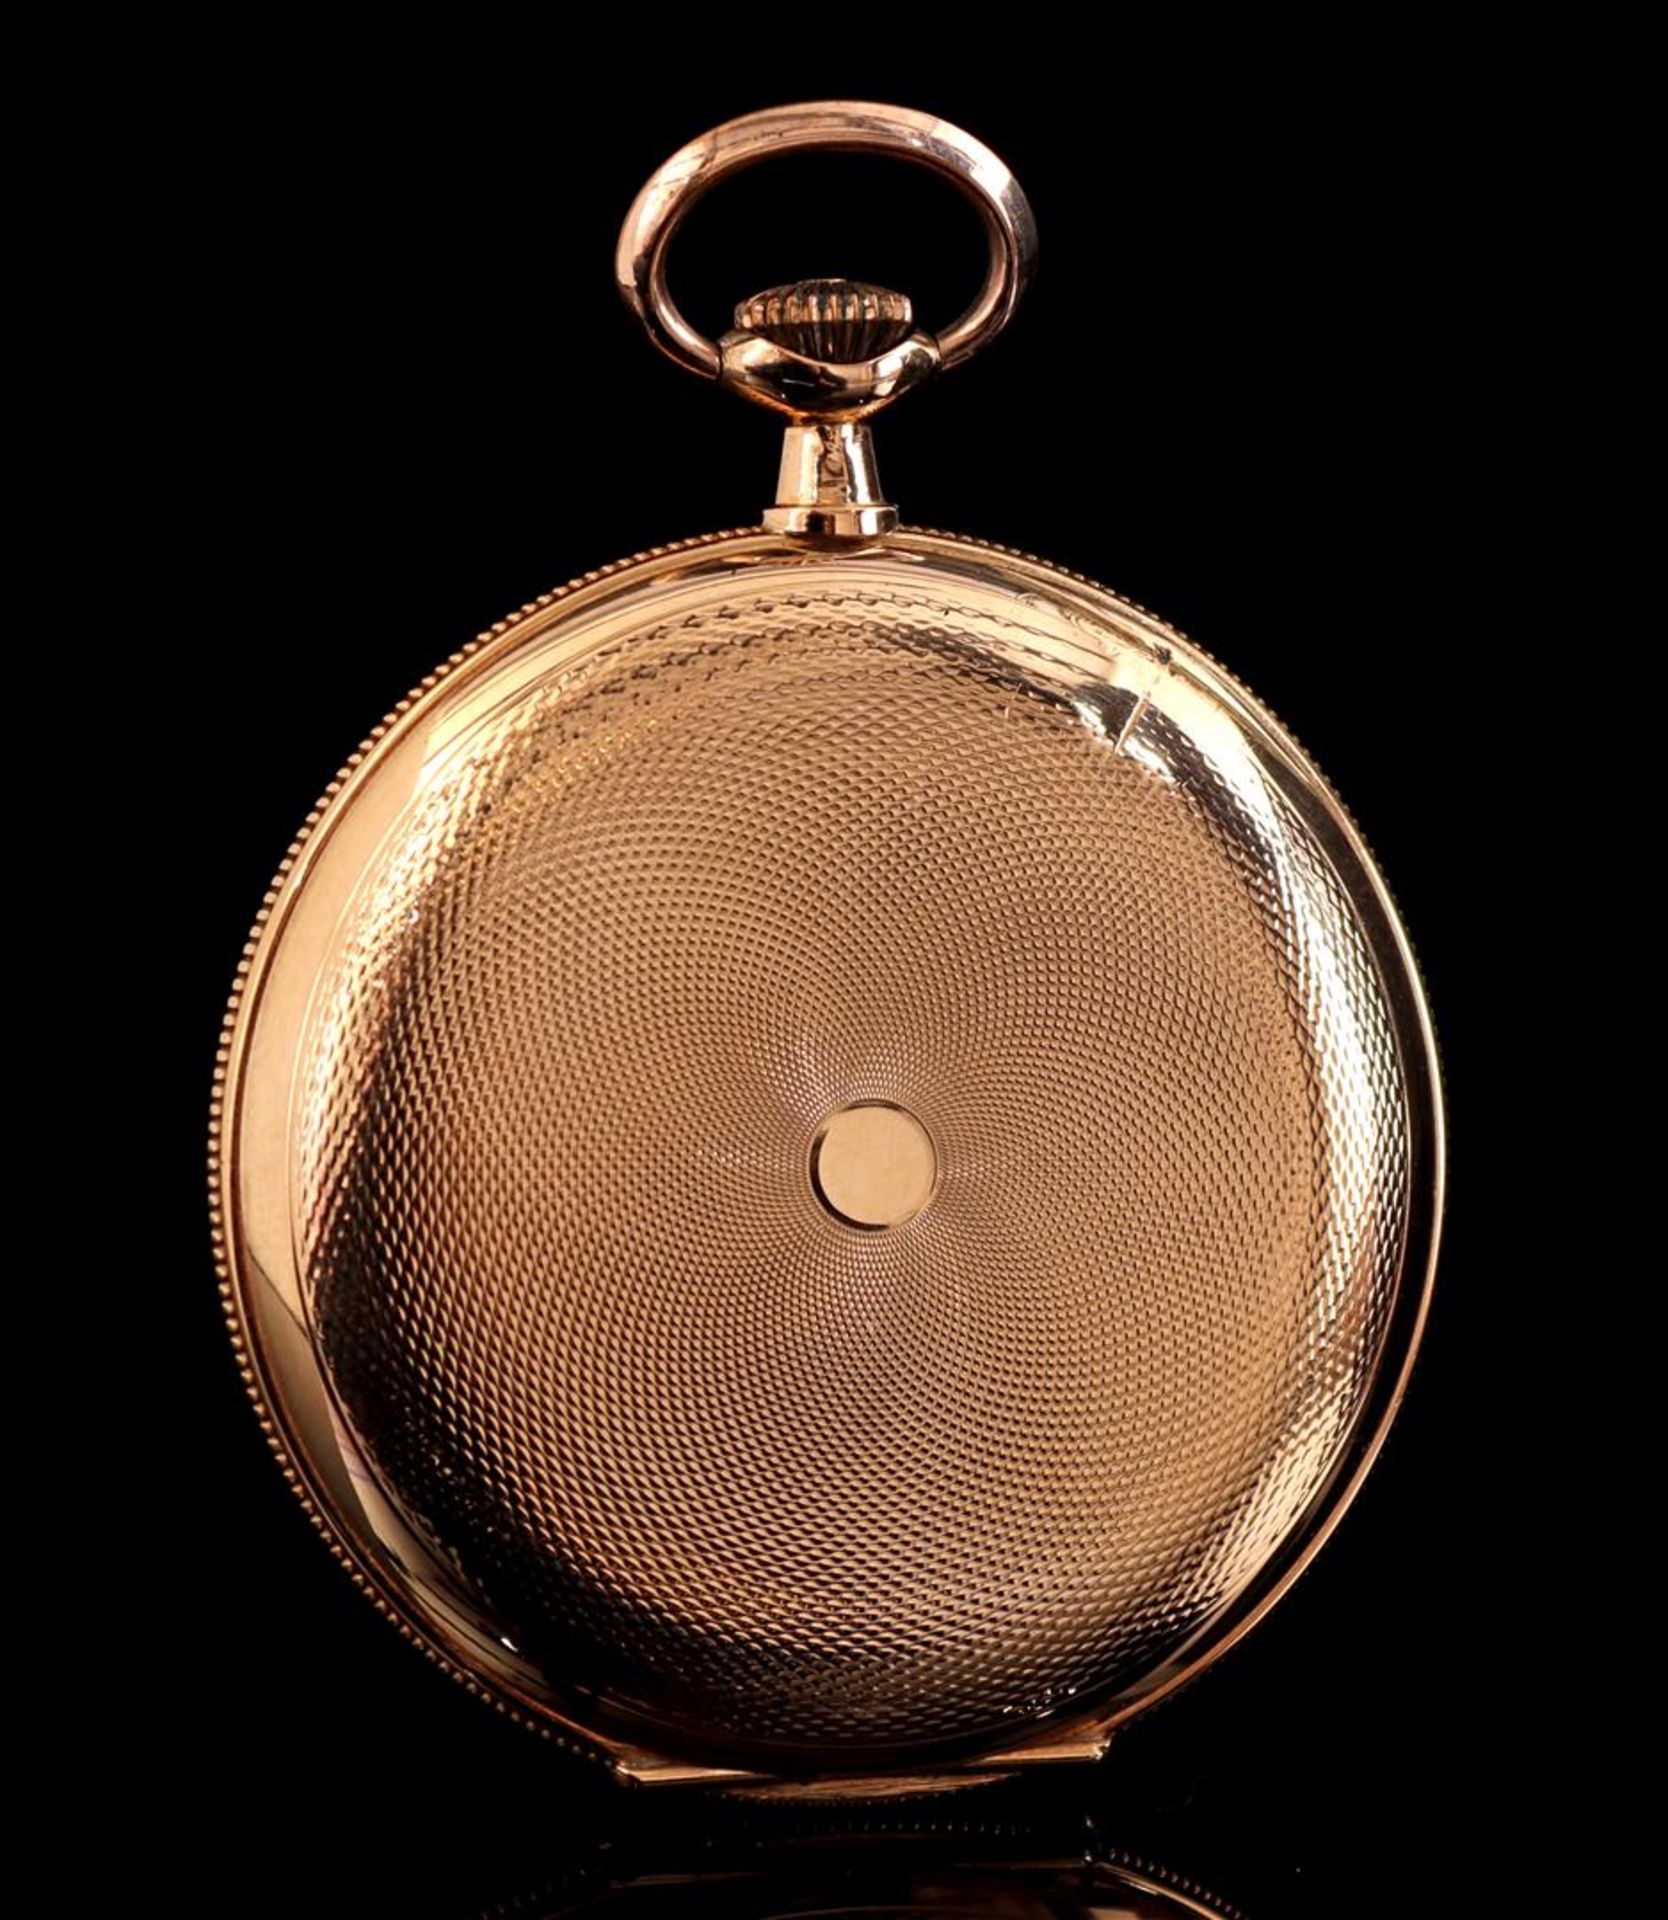 Cabo Watch pocket watch - Image 2 of 2